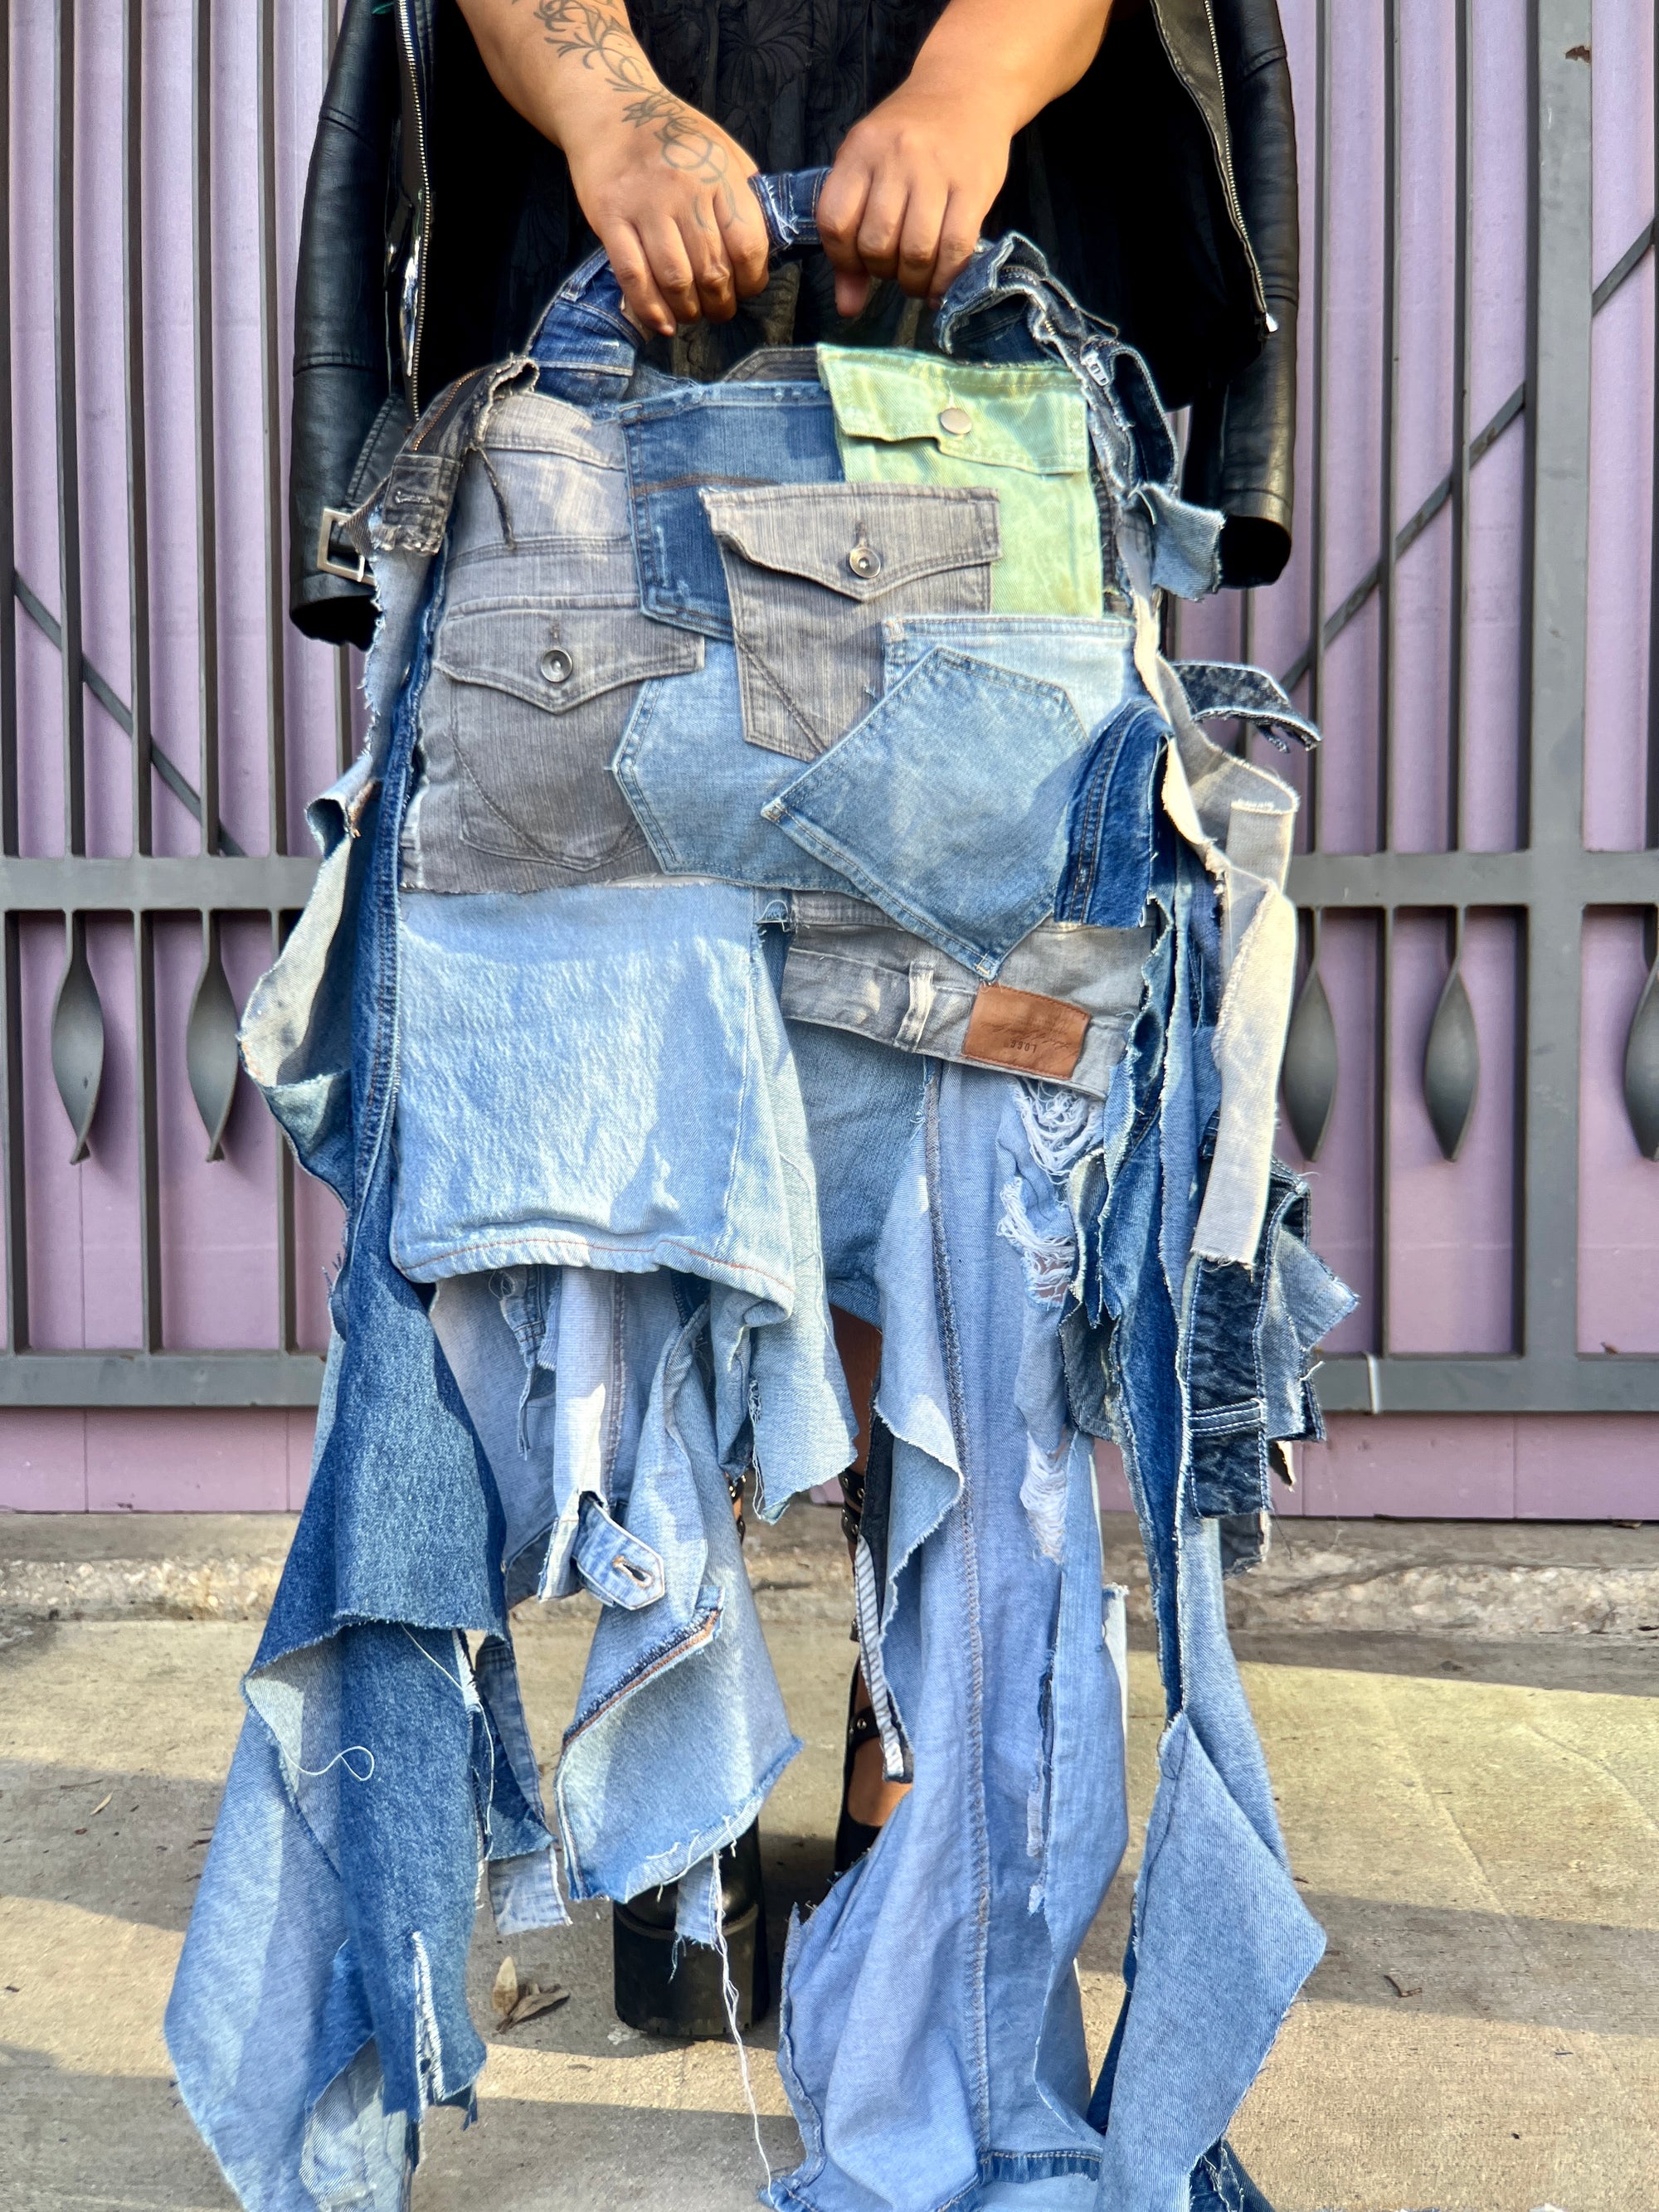 Ugly Handmade Denim Bag With Mix Matched Uneven Pockets